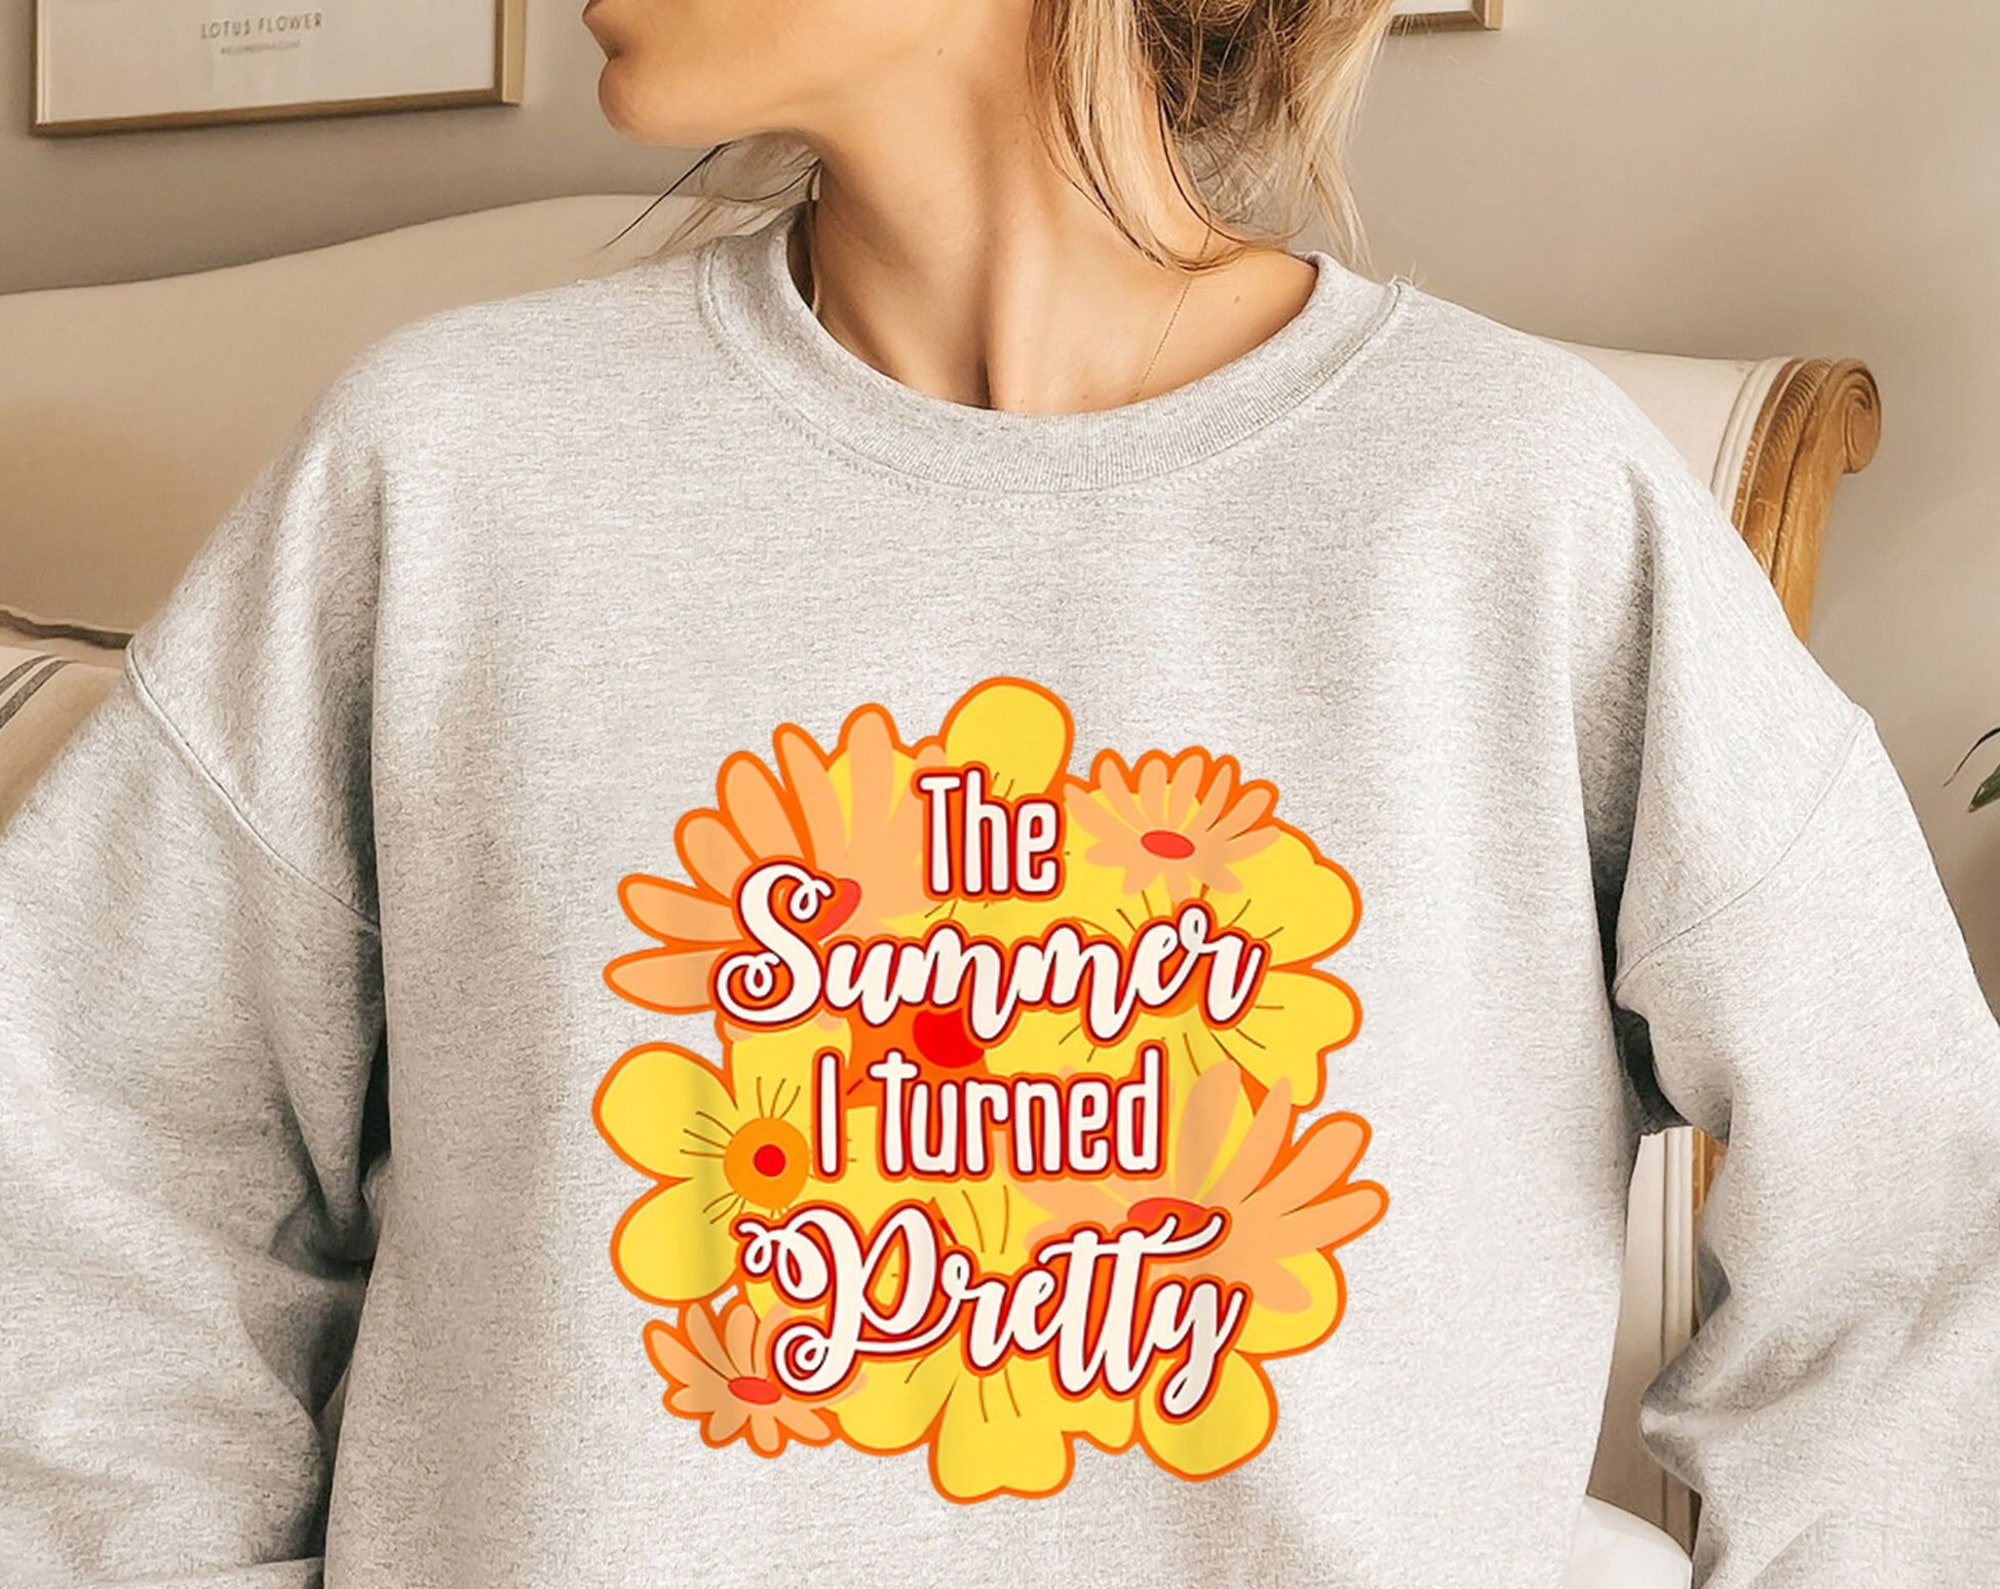 Discover The Summer I Turned Pretty Shirt, The Summer I Turned Pretty Sweatshirt